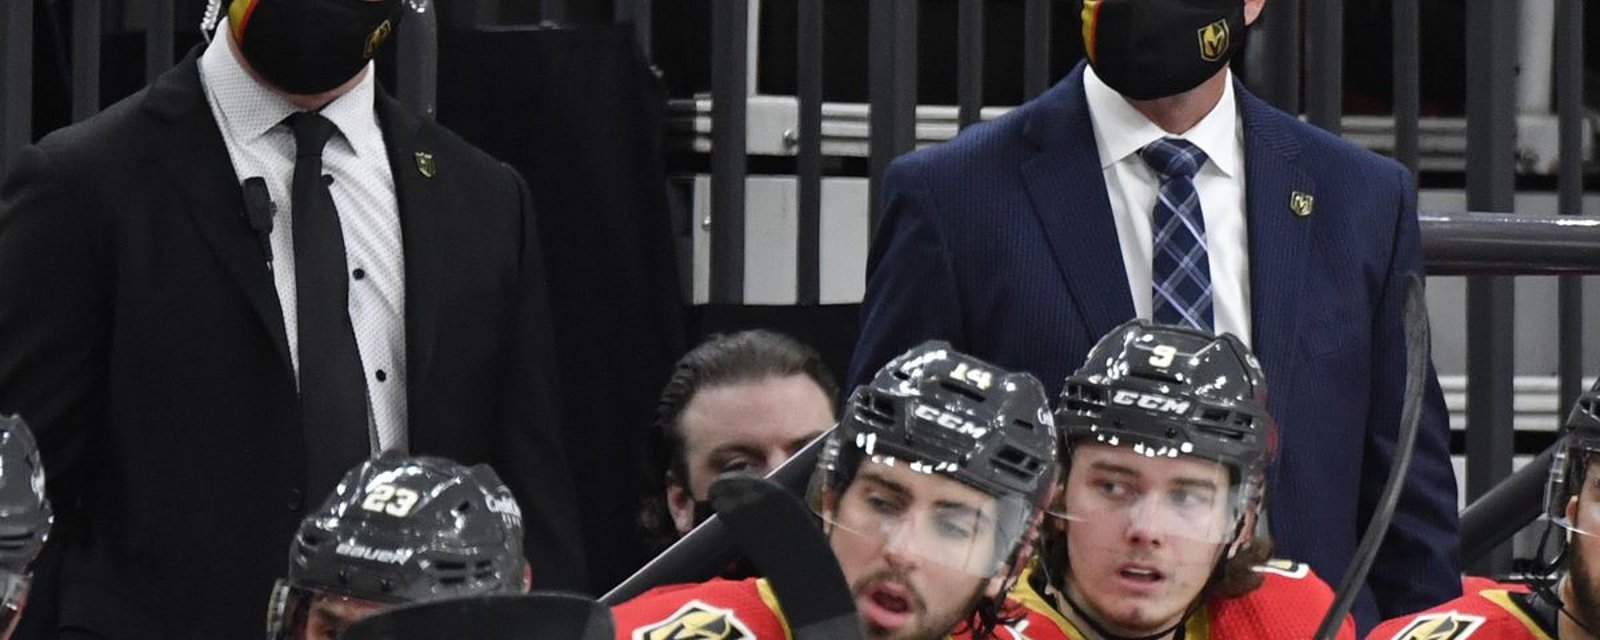 Golden Knights suddenly canceled postgame media access after win on Tuesday! 